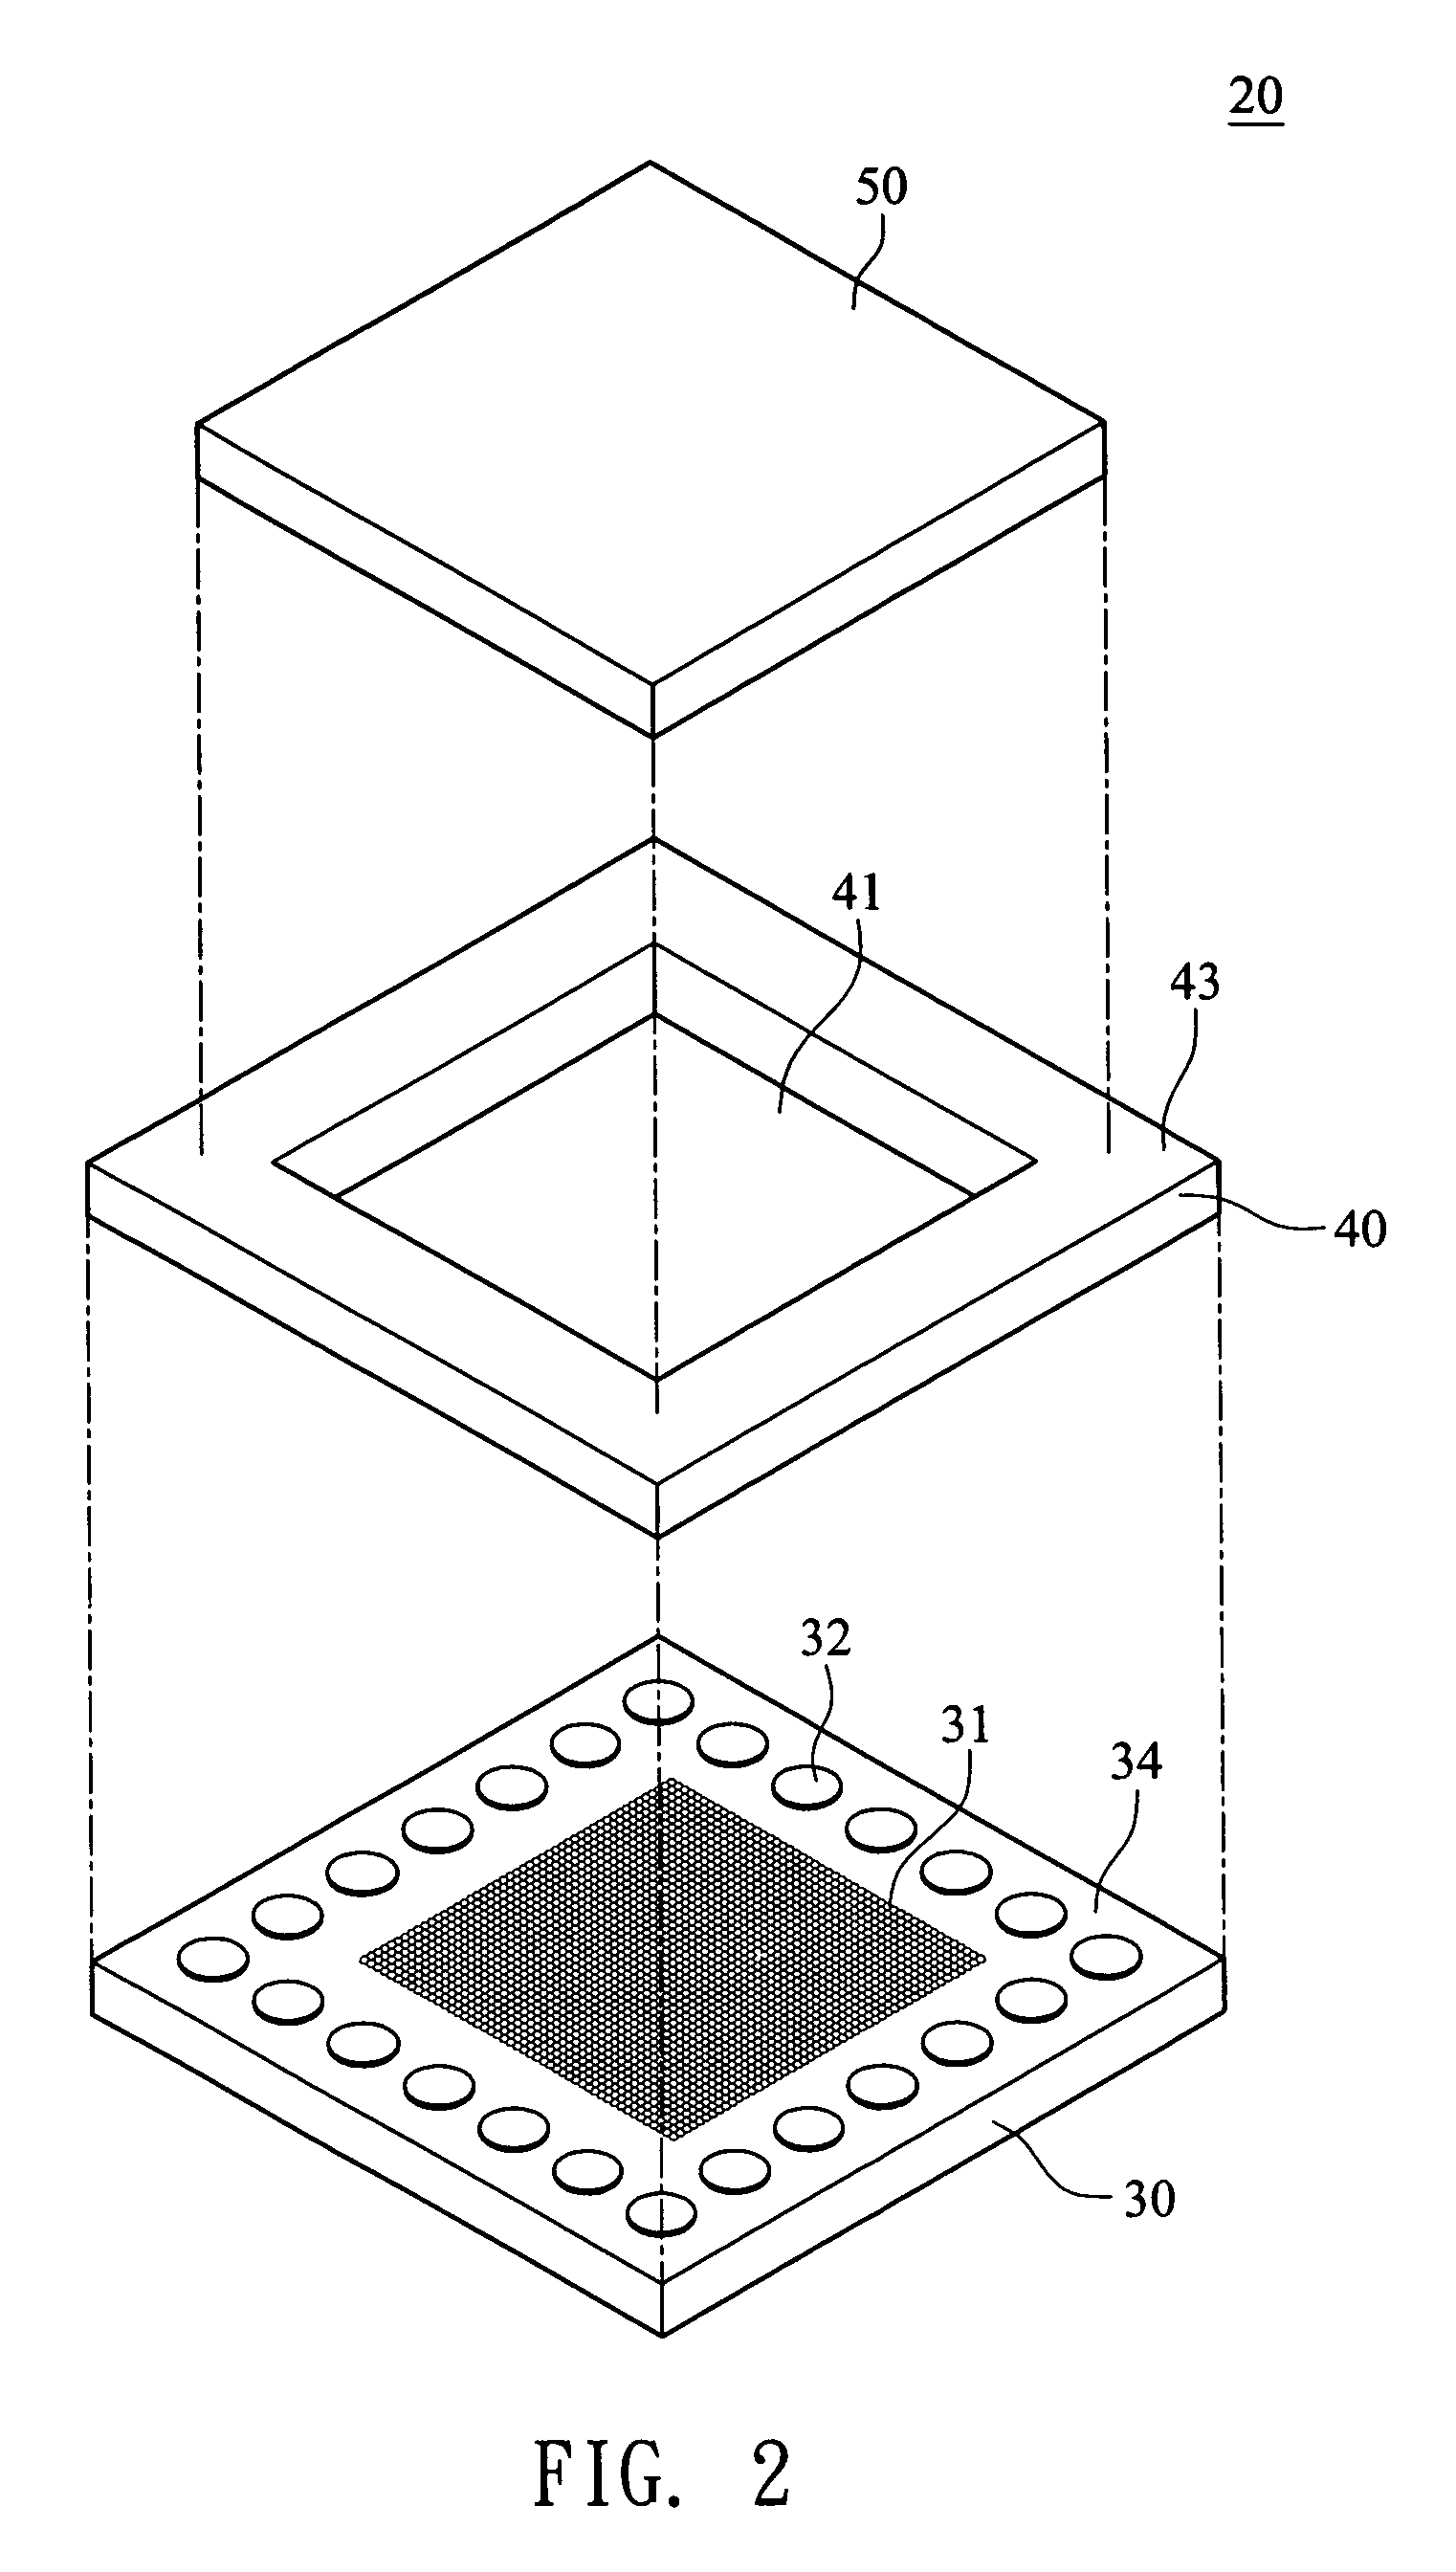 Image sensor module package structure with supporting element